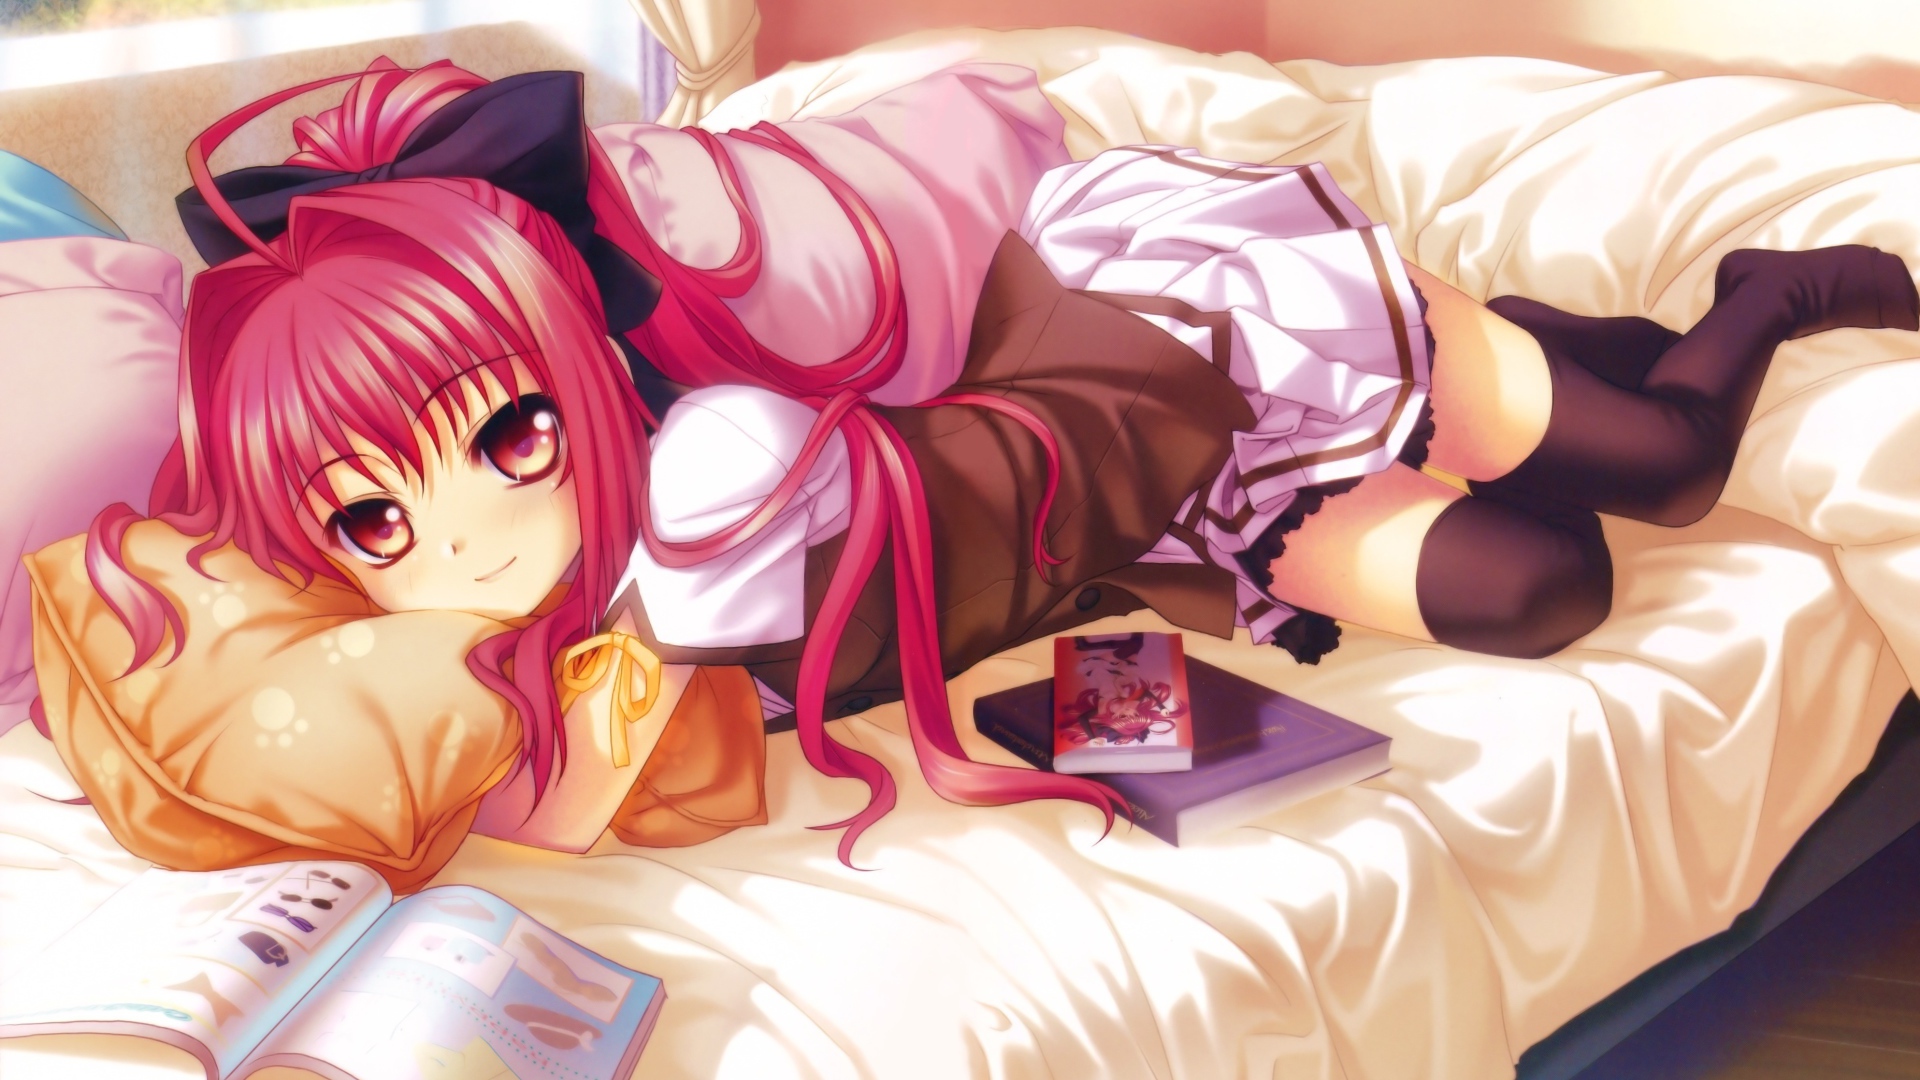 Anime girl with books lying on the couch